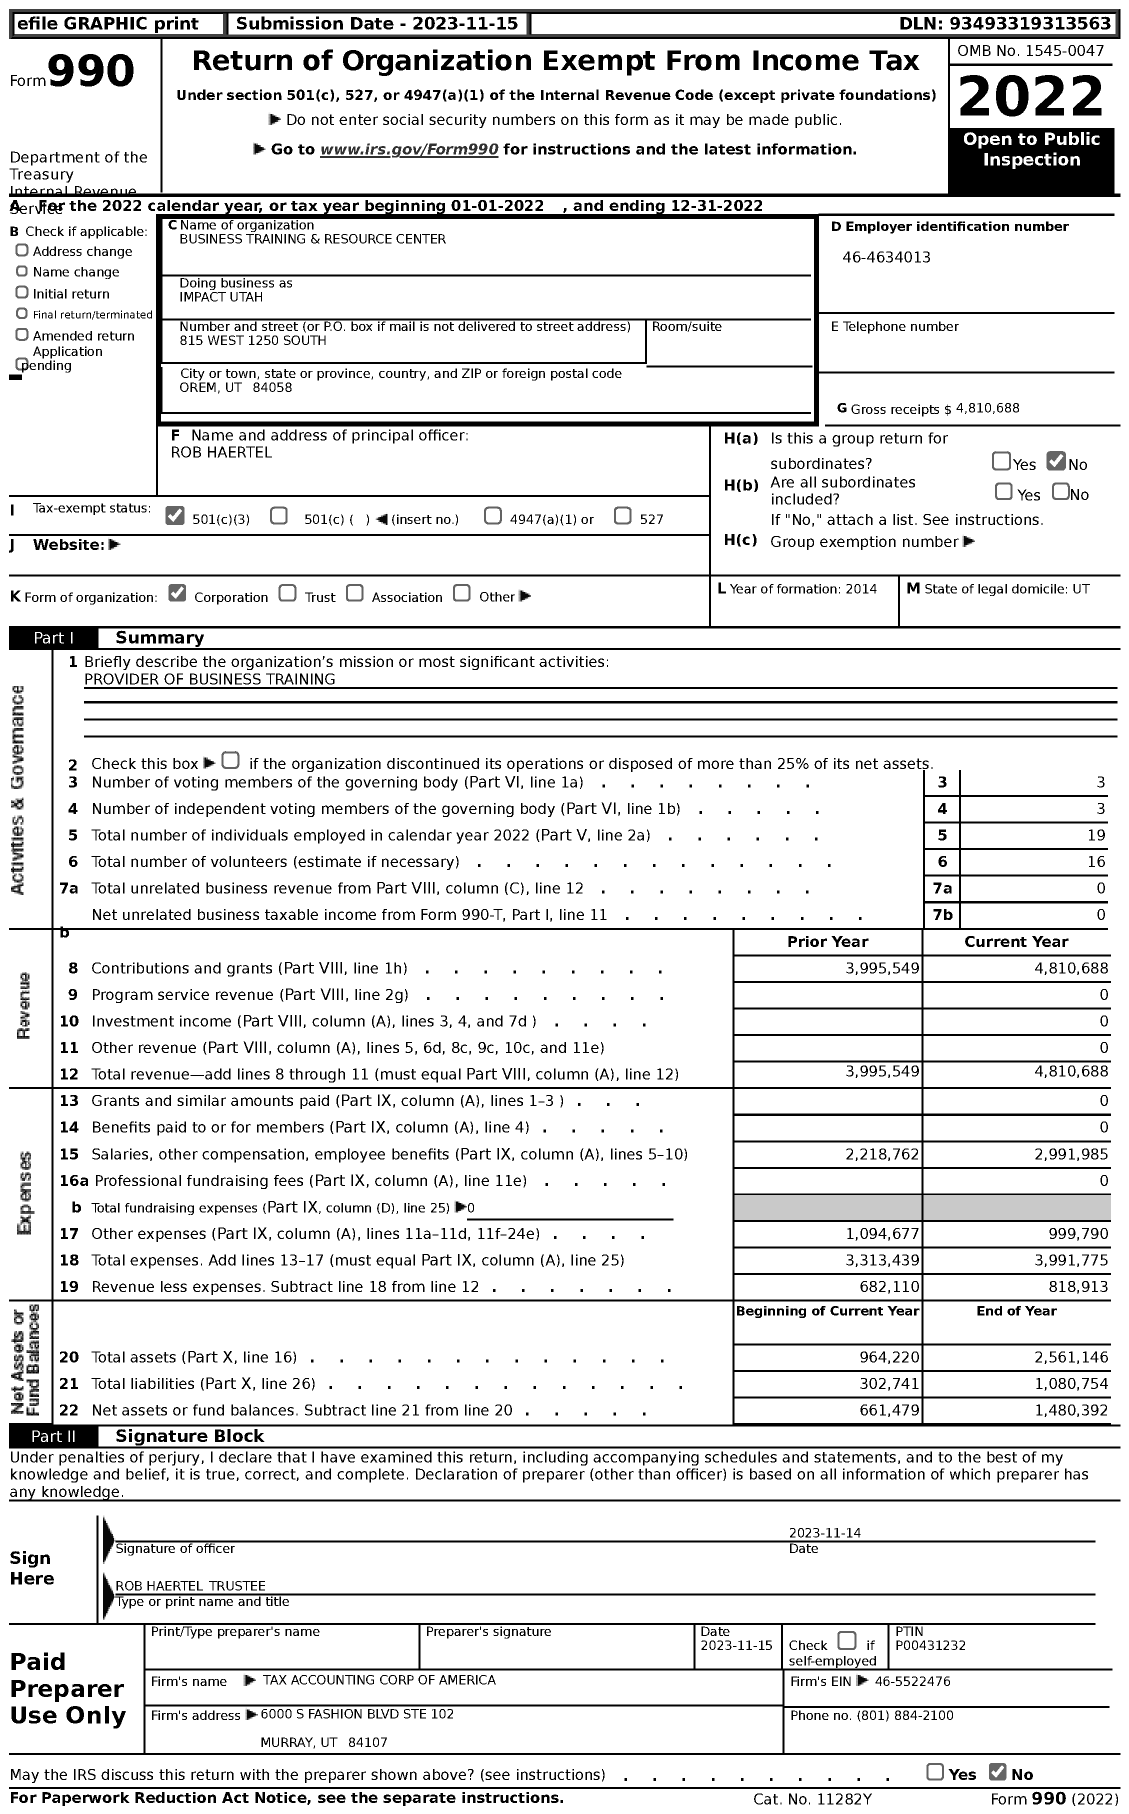 Image of first page of 2022 Form 990 for Impact Utah / Business Training & Resource Center